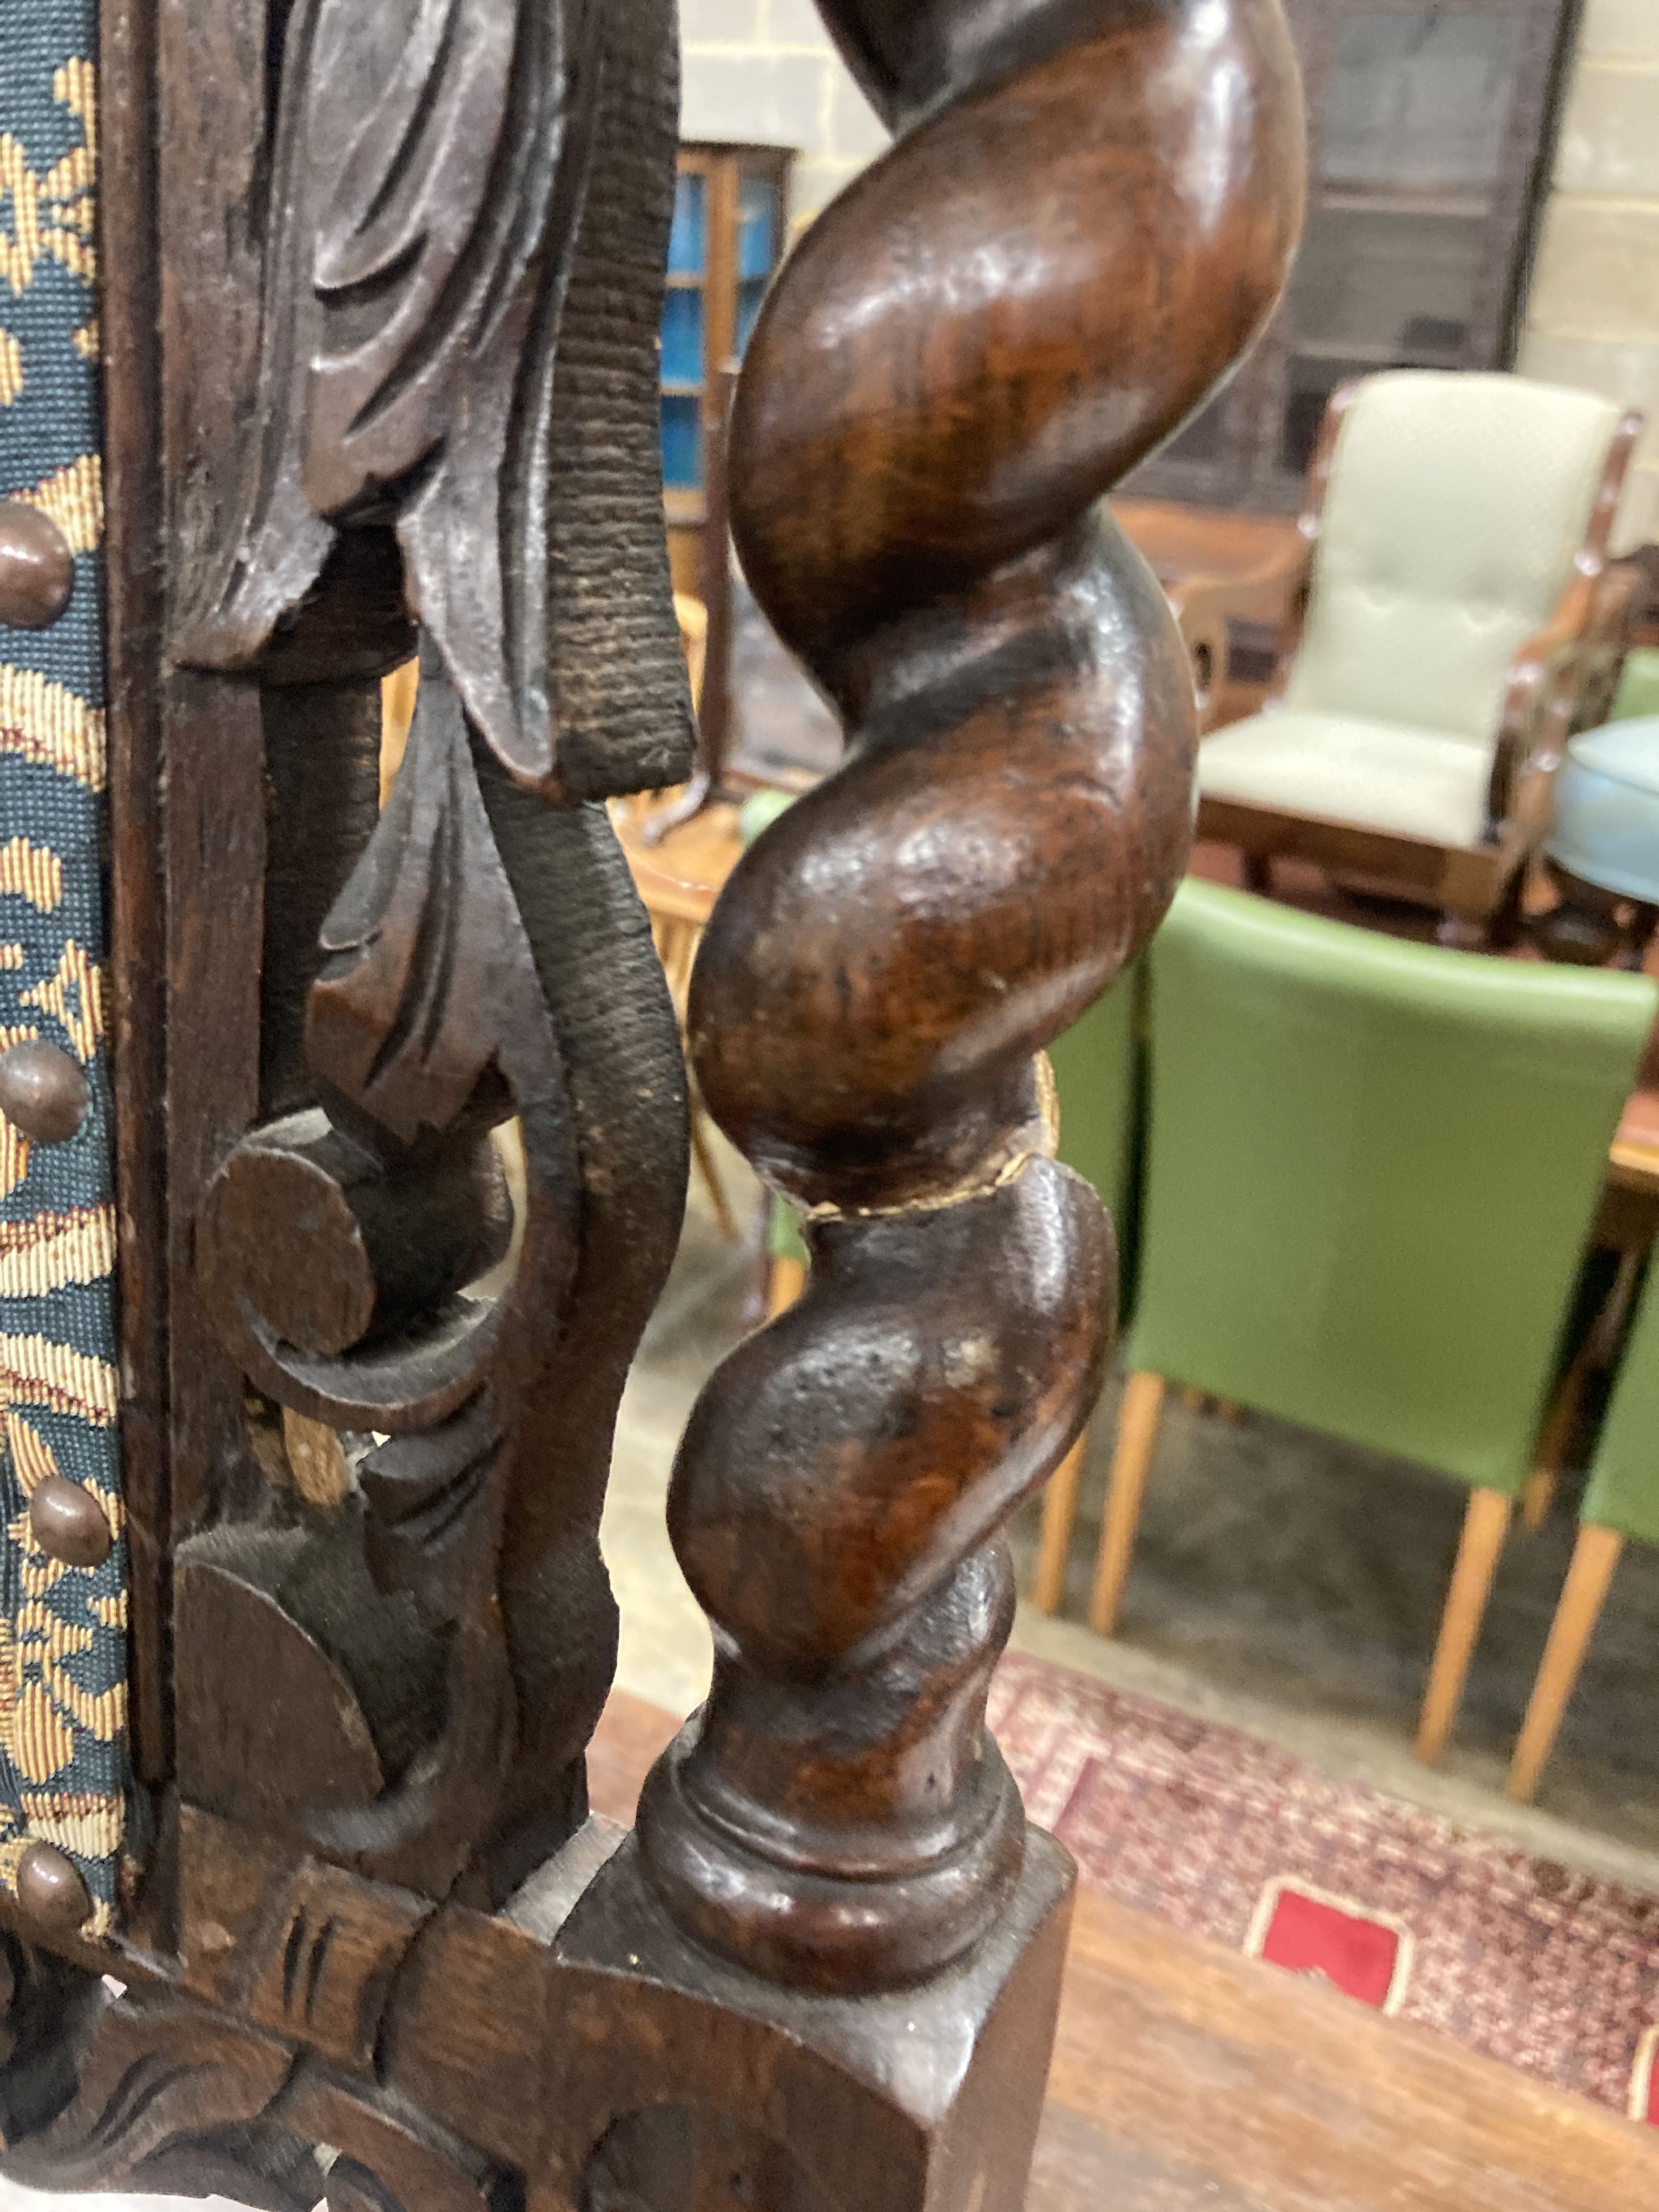 A pair of late 19th century Flemish carved oak panel backed dining chairs